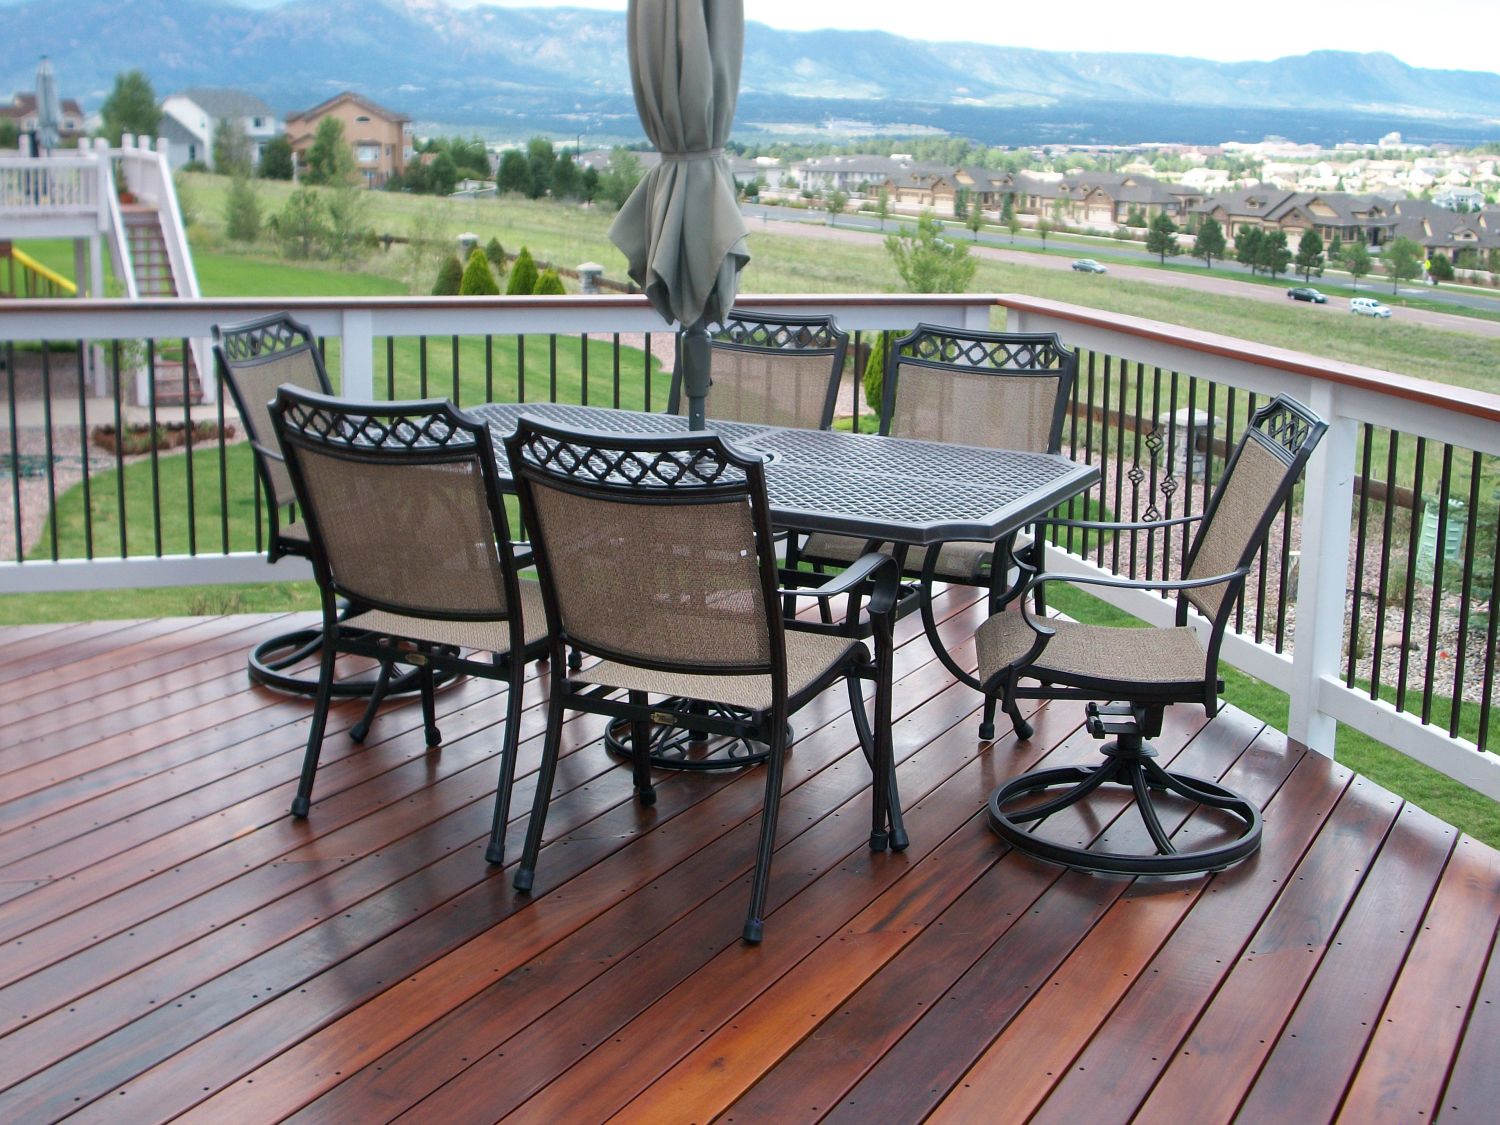 A custom built hardwood deck with a large table and chairs for entertaining.